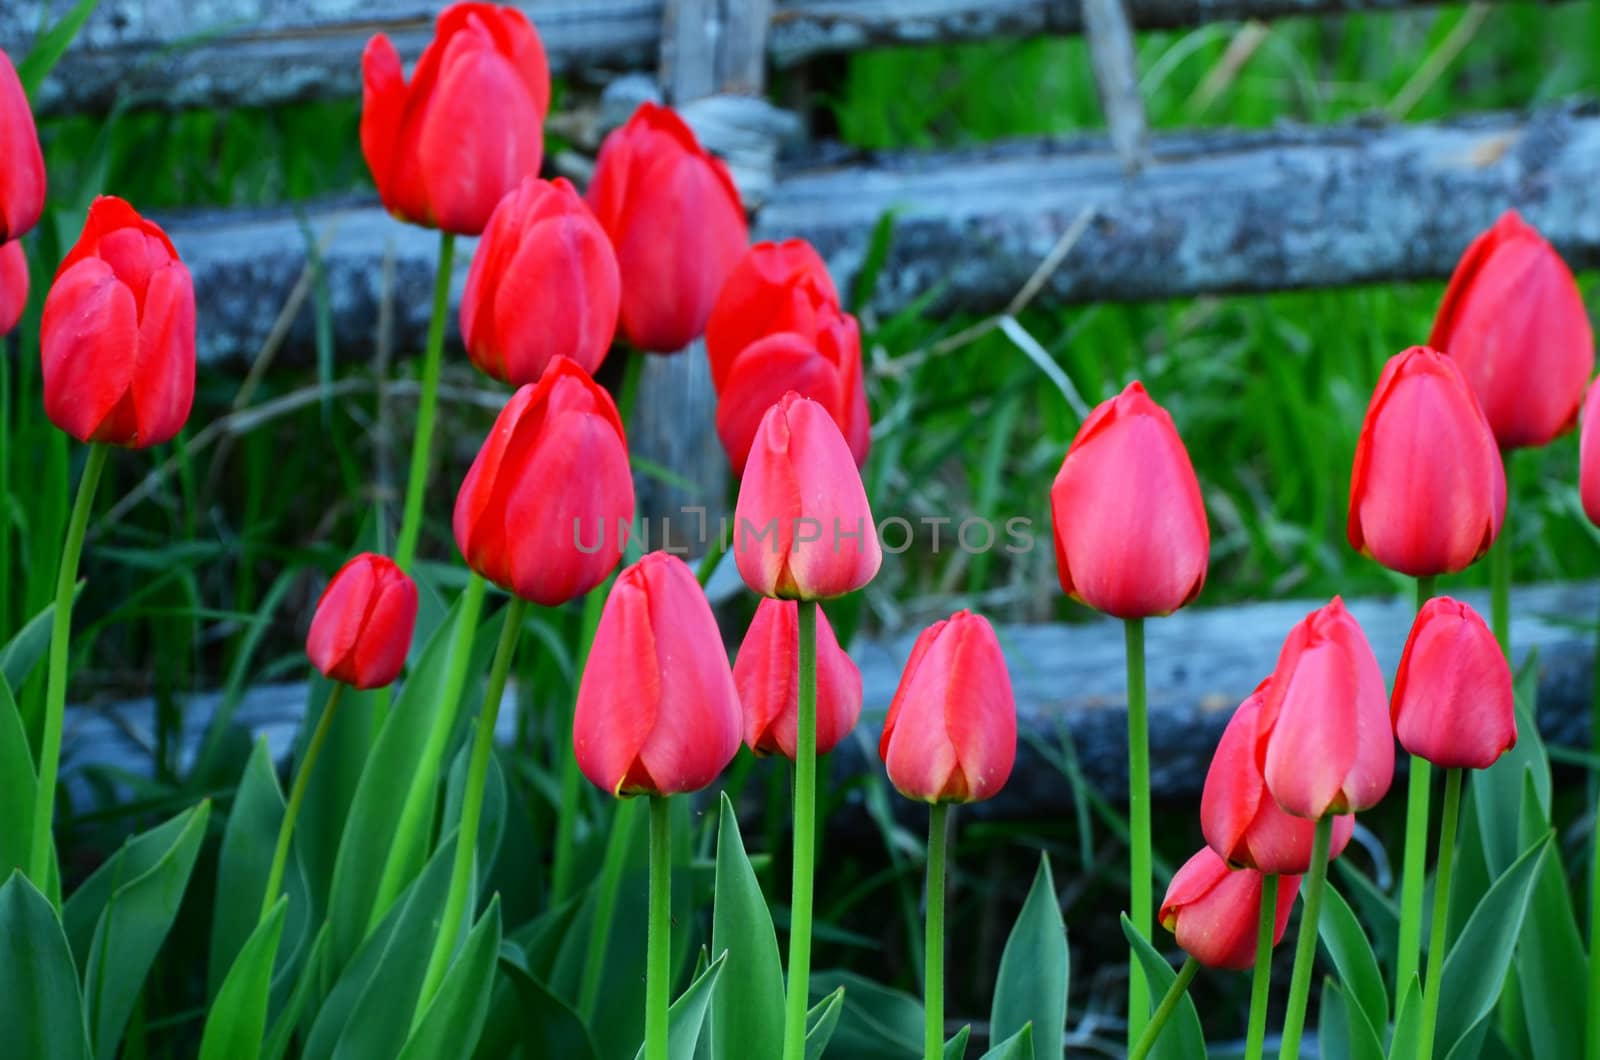 Red tulips in a garden